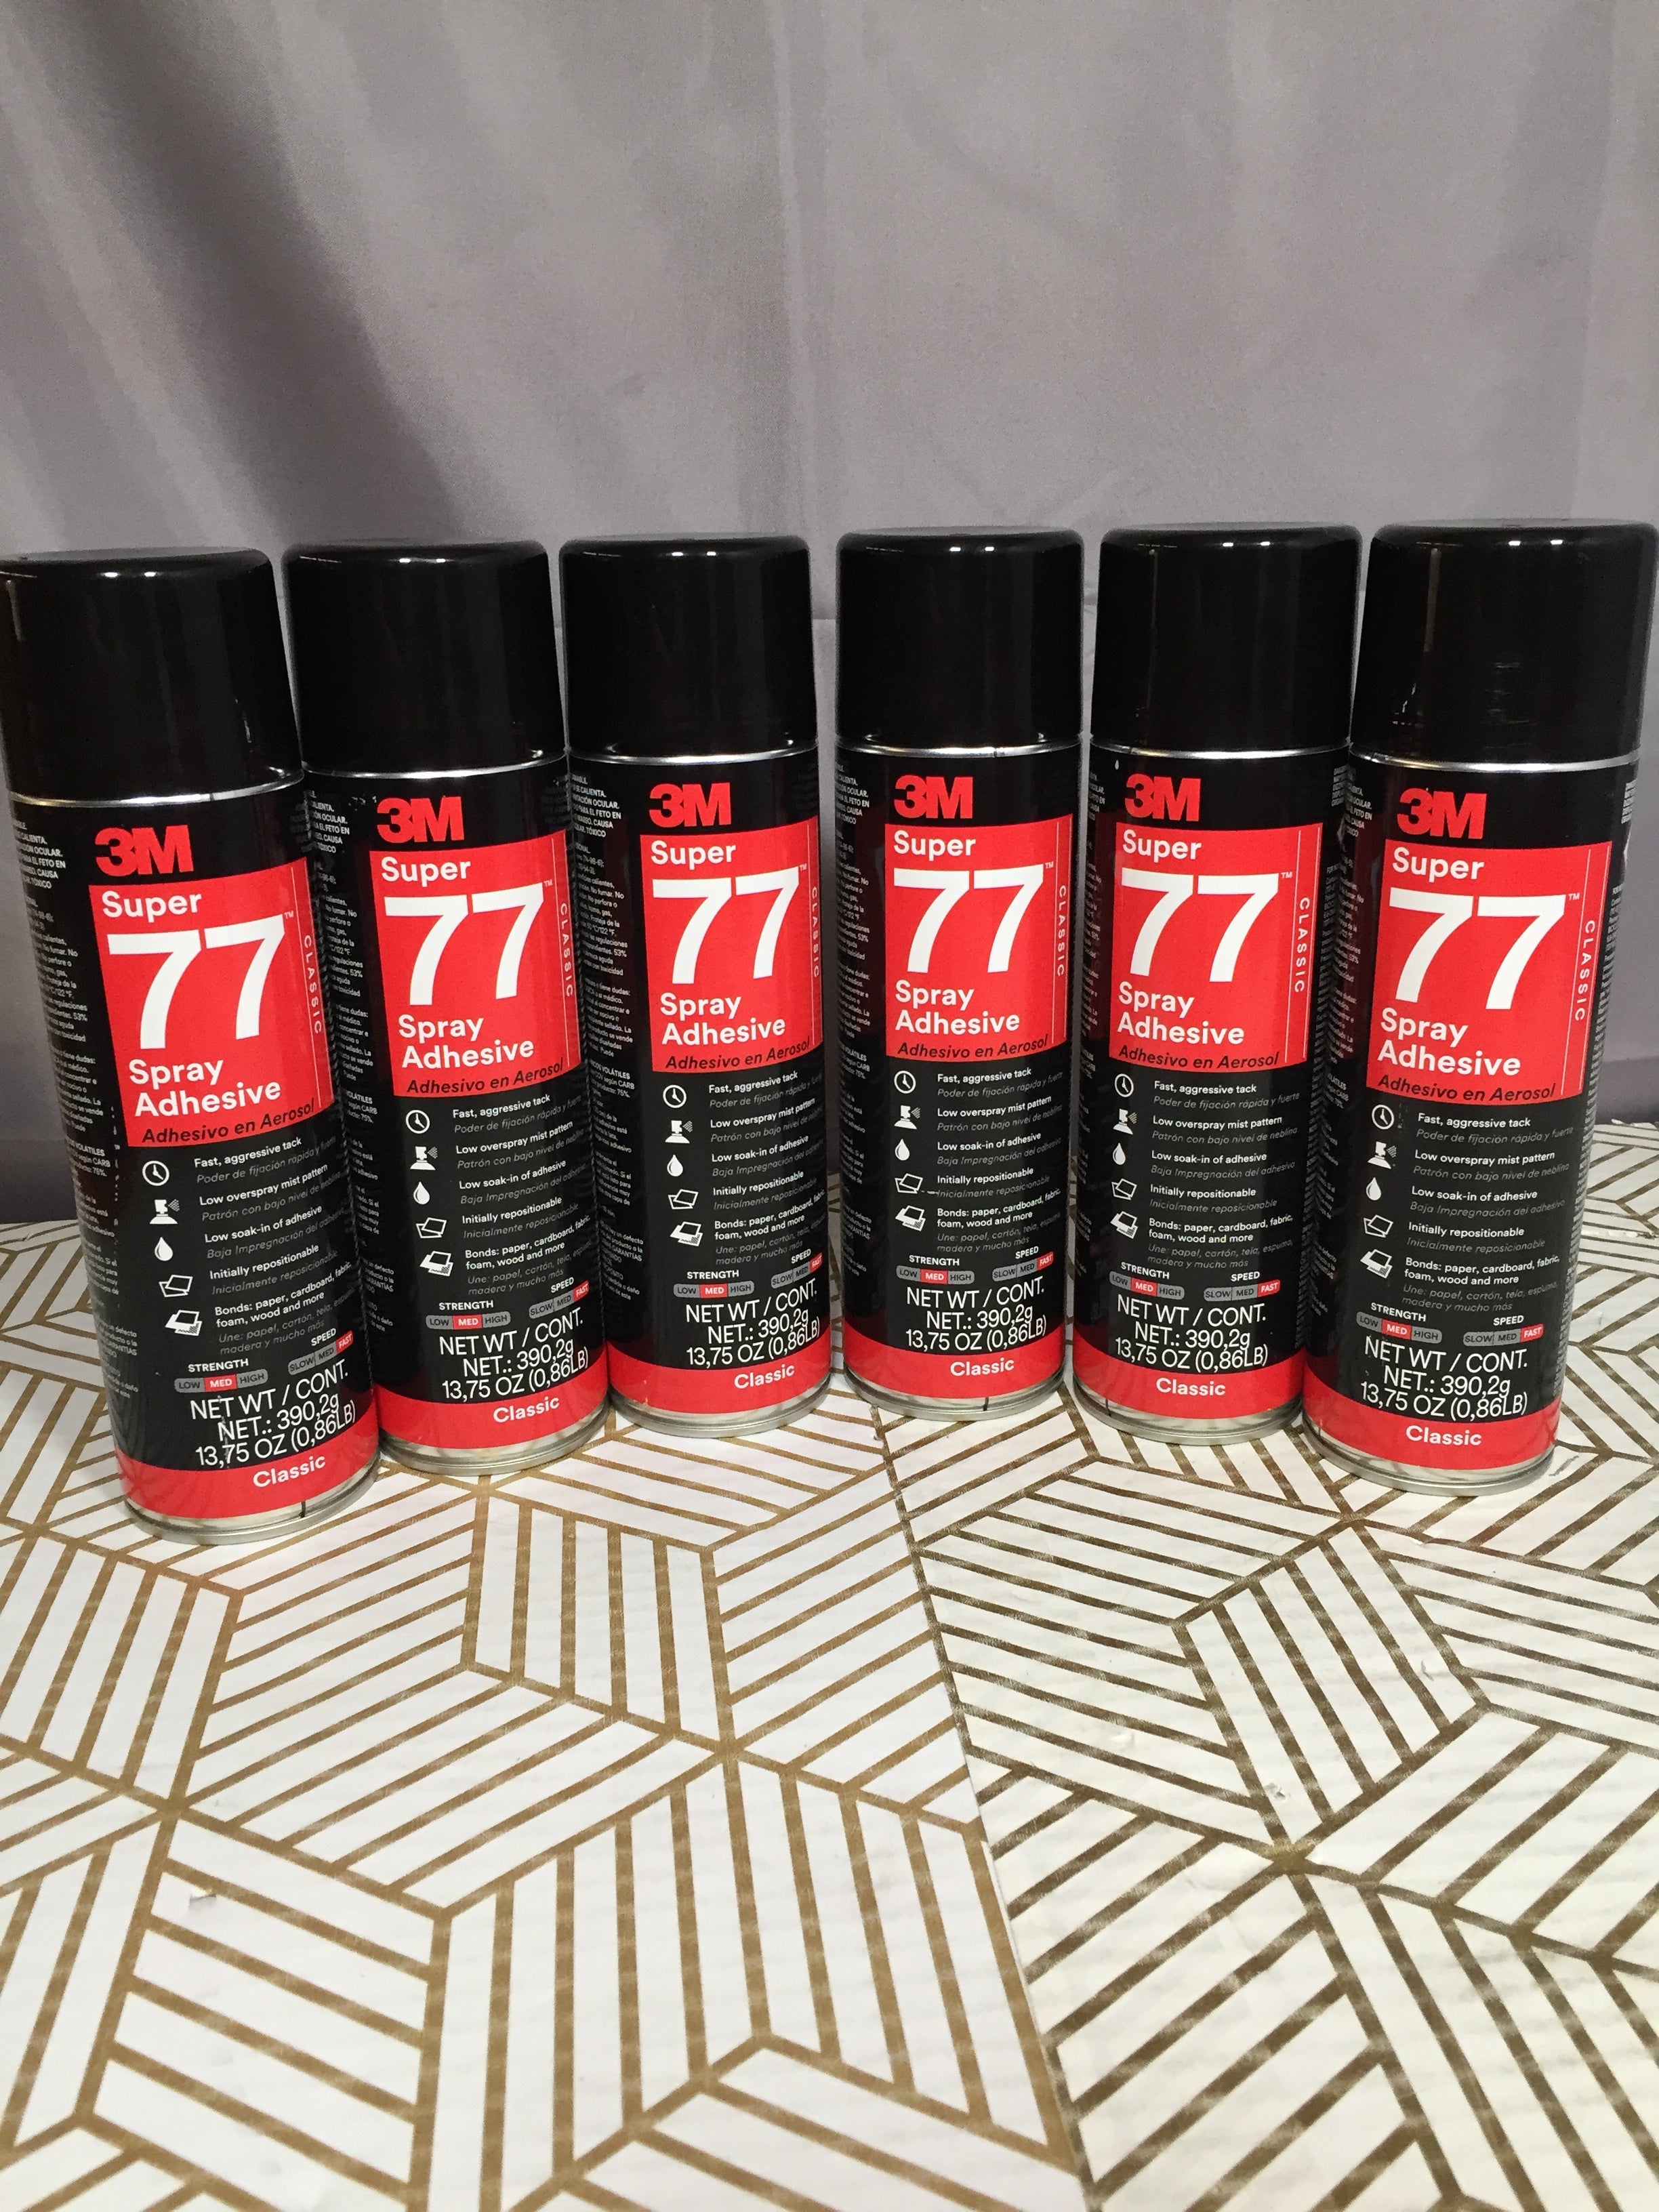 3M SUPER 77 Spray Adhesive Classic | 6 CANS | **EXPIRED** (8201341173998)